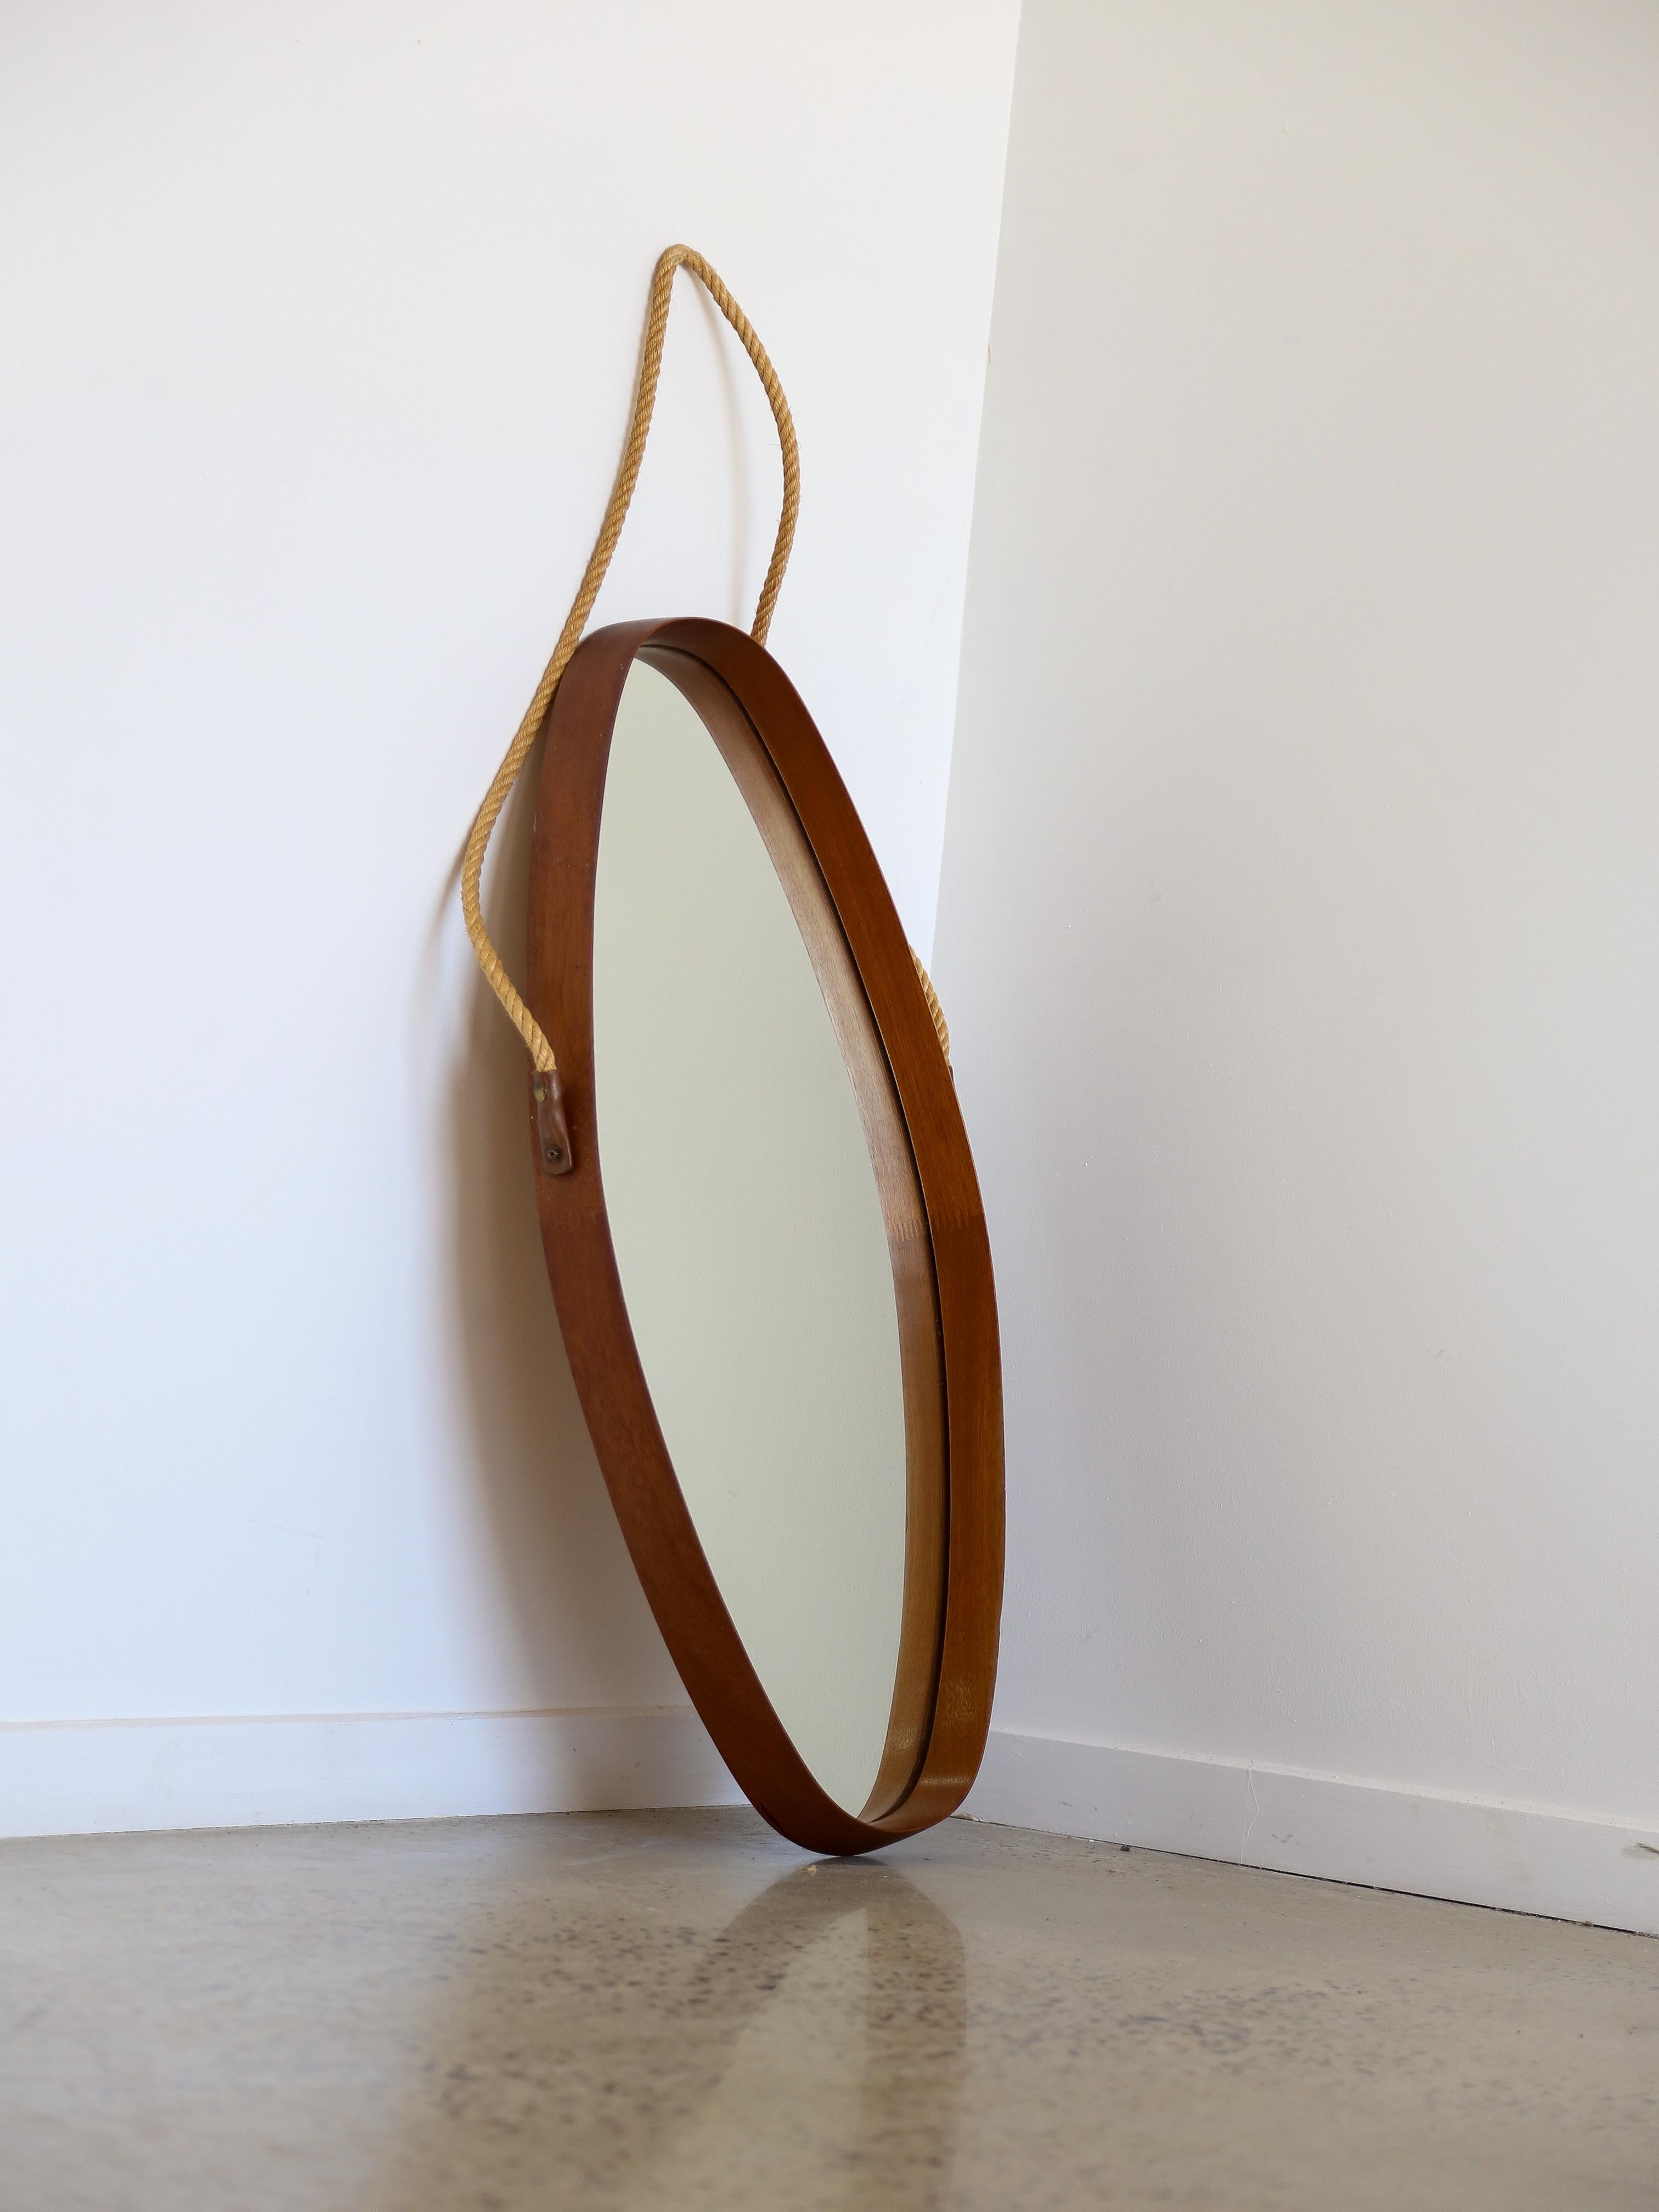 Italian Mid Century Modern round wall mirror.

The frame of the mirror is made from teak wood, which is known for its natural beauty and durability. Teakwood features a distinctive grain pattern and a warm, rich color that can add a touch of rustic